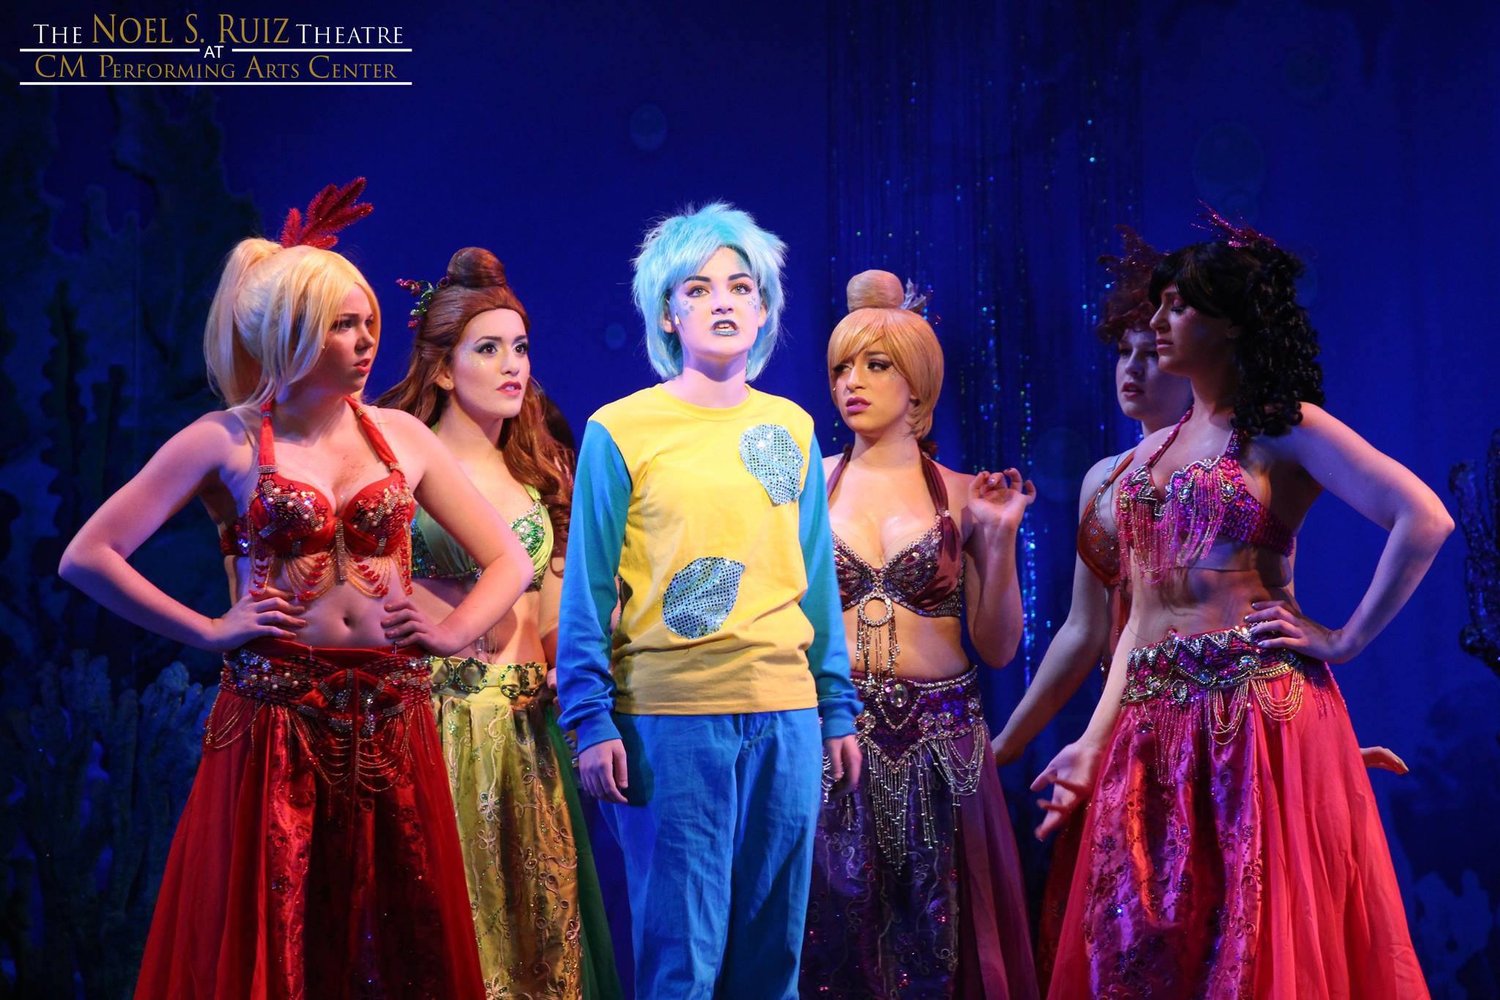 The Little Mermaid at CM Performing Arts Center (Andrina)